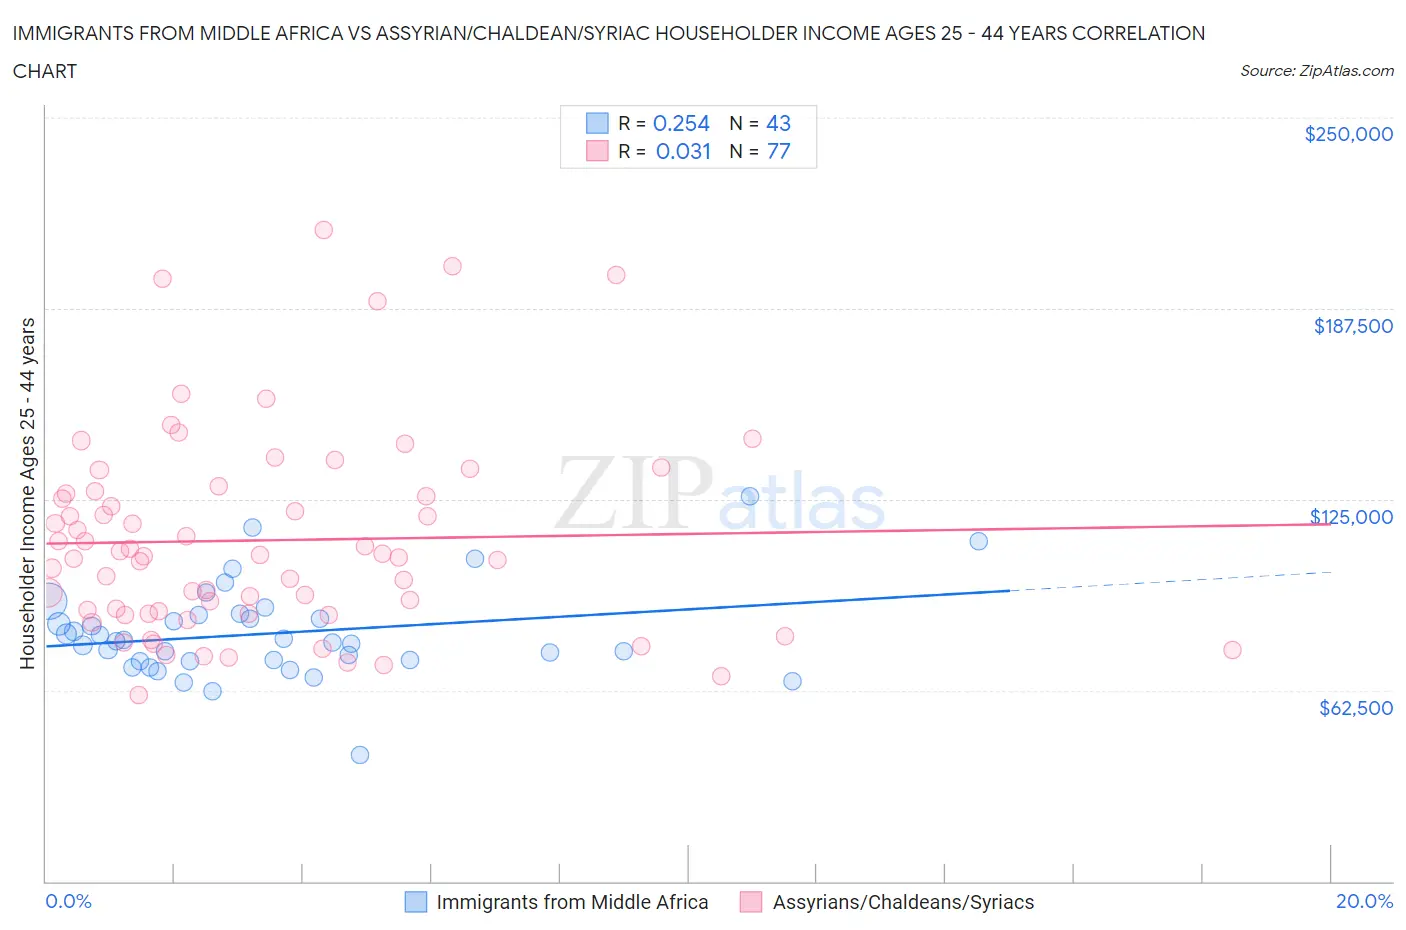 Immigrants from Middle Africa vs Assyrian/Chaldean/Syriac Householder Income Ages 25 - 44 years